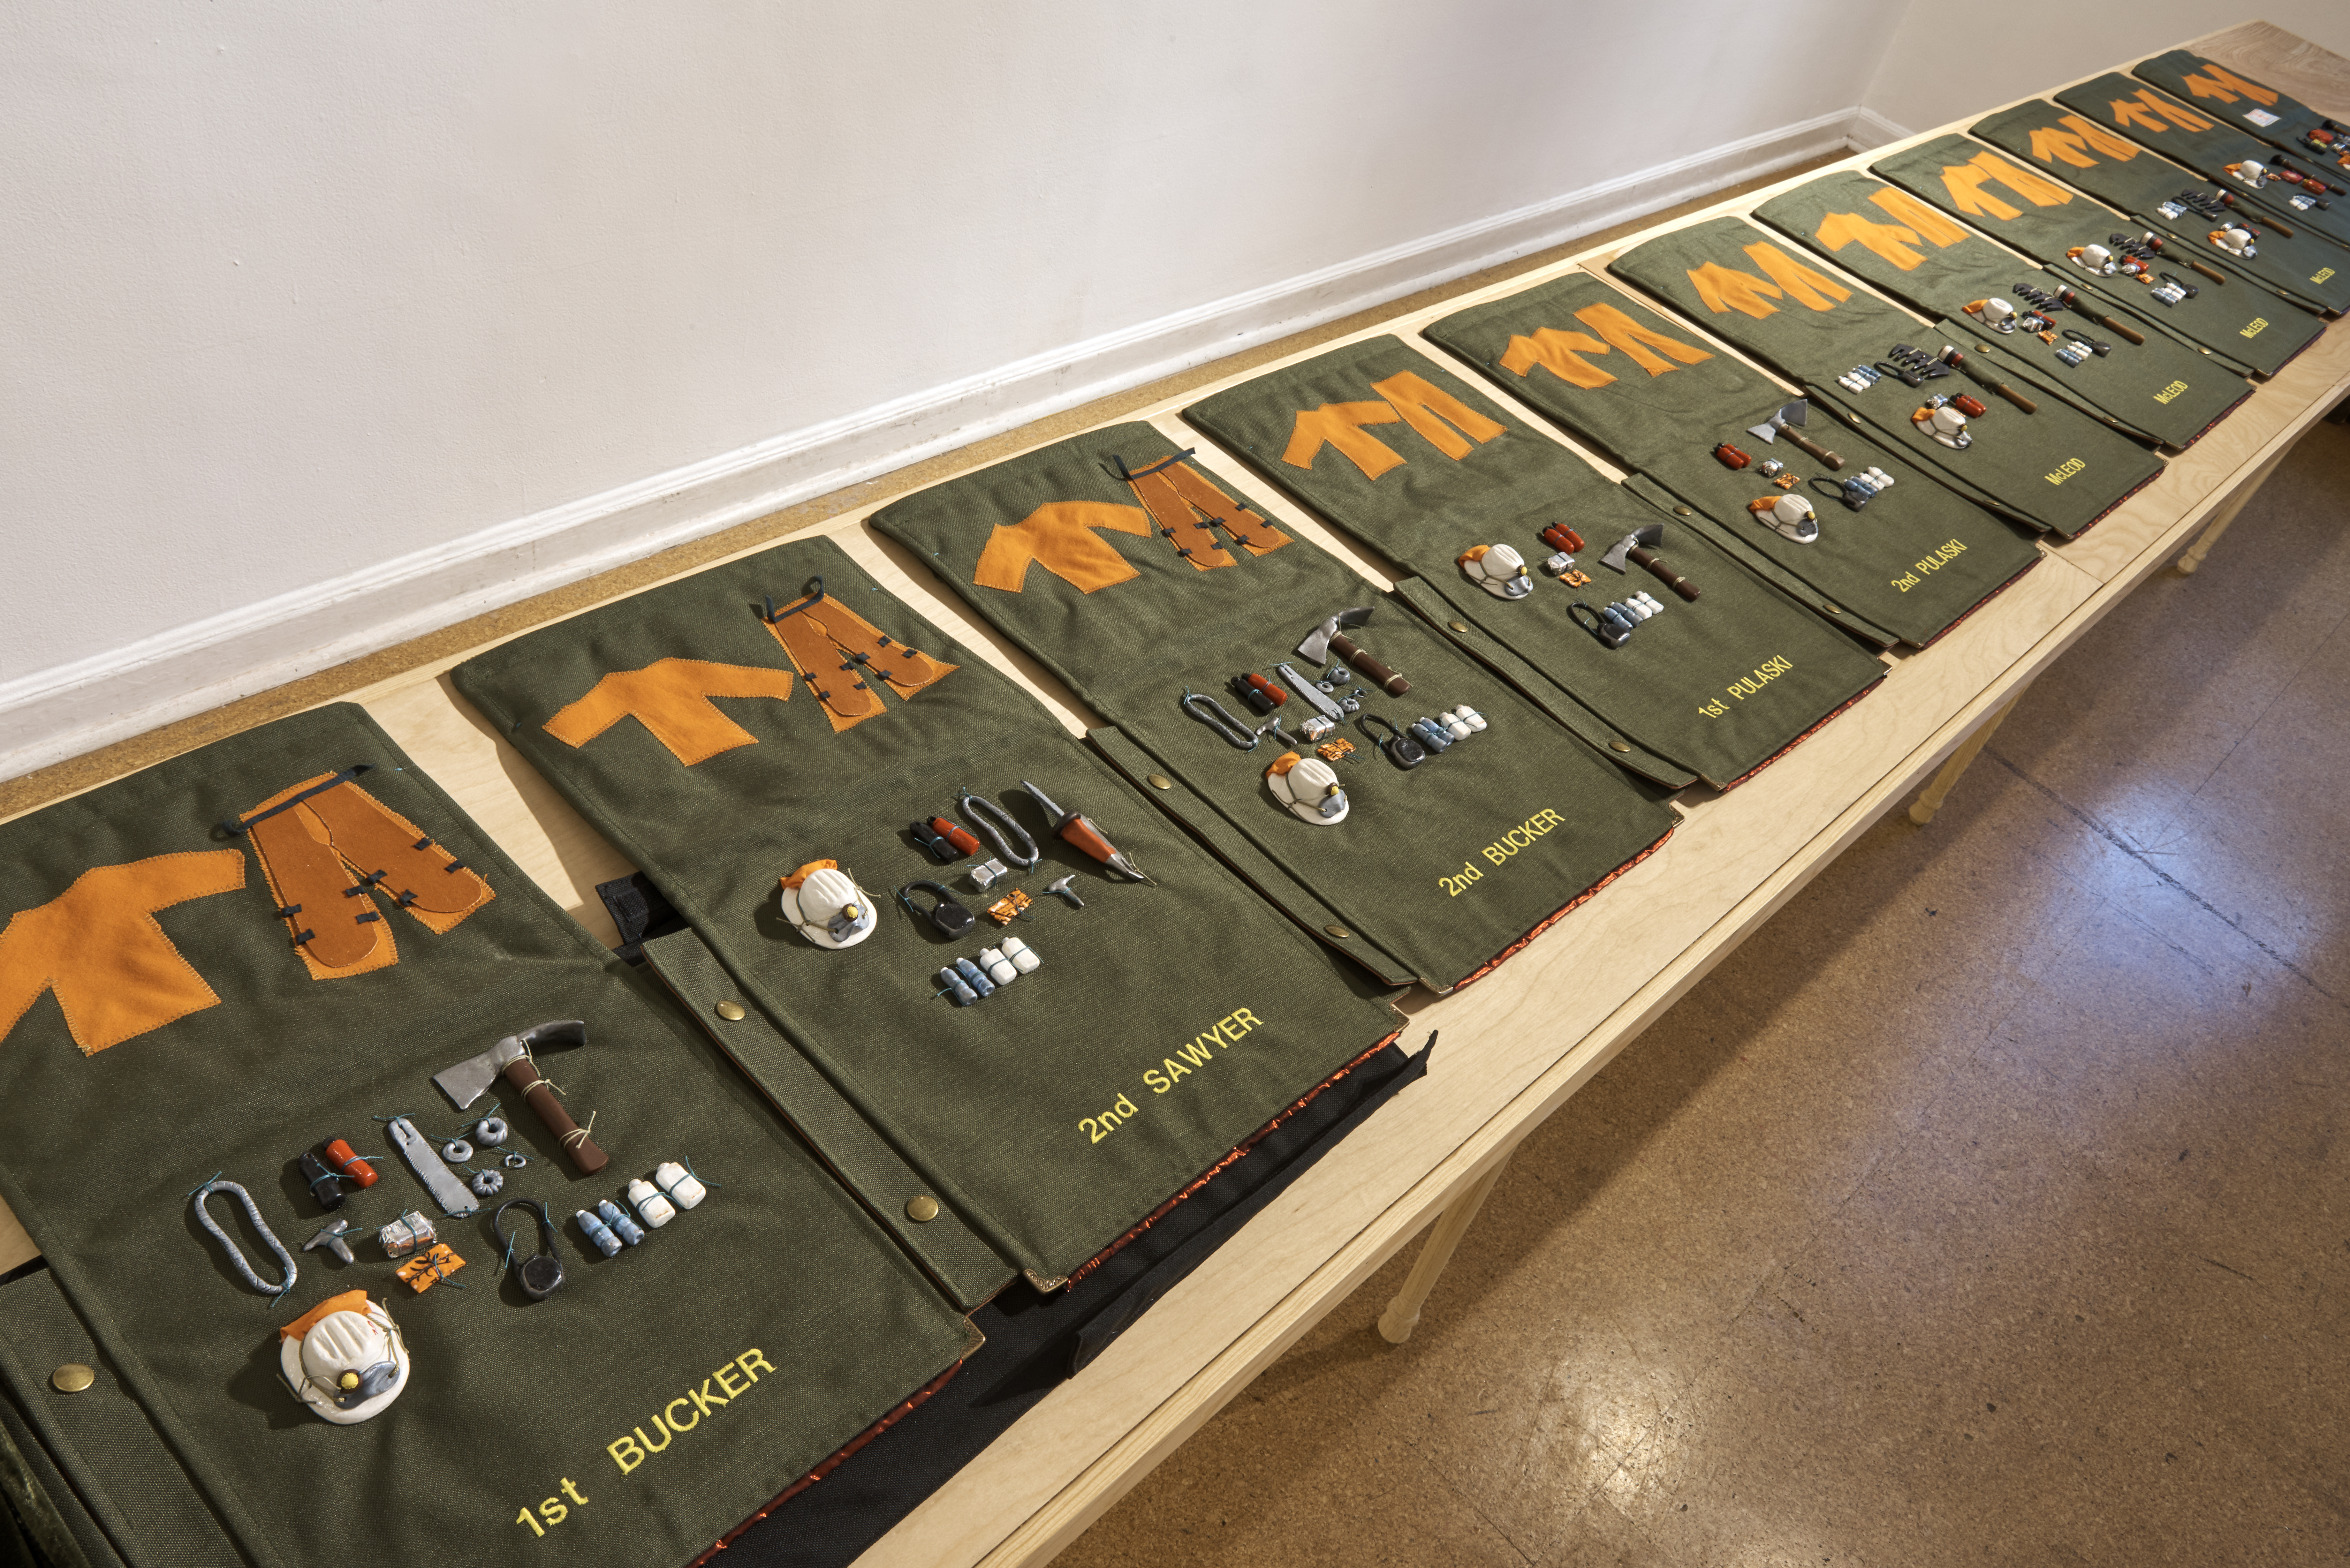 Kim Abeles and the Firefighting Women of Camp 13 / Valise 2 - Tools from the series, Valises for Camp Ground: Arts, Corrections, and Fire Management in the Santa Monica Mountains
2018
Hand constructed “backpack” valise made with Cordura, Velvet, Clay miniatures of firefighting tools, Embroidered names of each position on a fire crew, brass hardware 
Size: Closed: 23” x 10” x 14”   Open: 10” x 167” x 22"
This inaugural Camp Ground project with inmates from Camp 13 was managed by the Armory Center for the Arts, with Kim Abeles as the first commissioned artist. Camp Ground: Arts, Corrections, and Fire Management in the Santa Monica Mountains is made possible by the National Endowment for the Arts and the Los Angeles County Arts Commission.